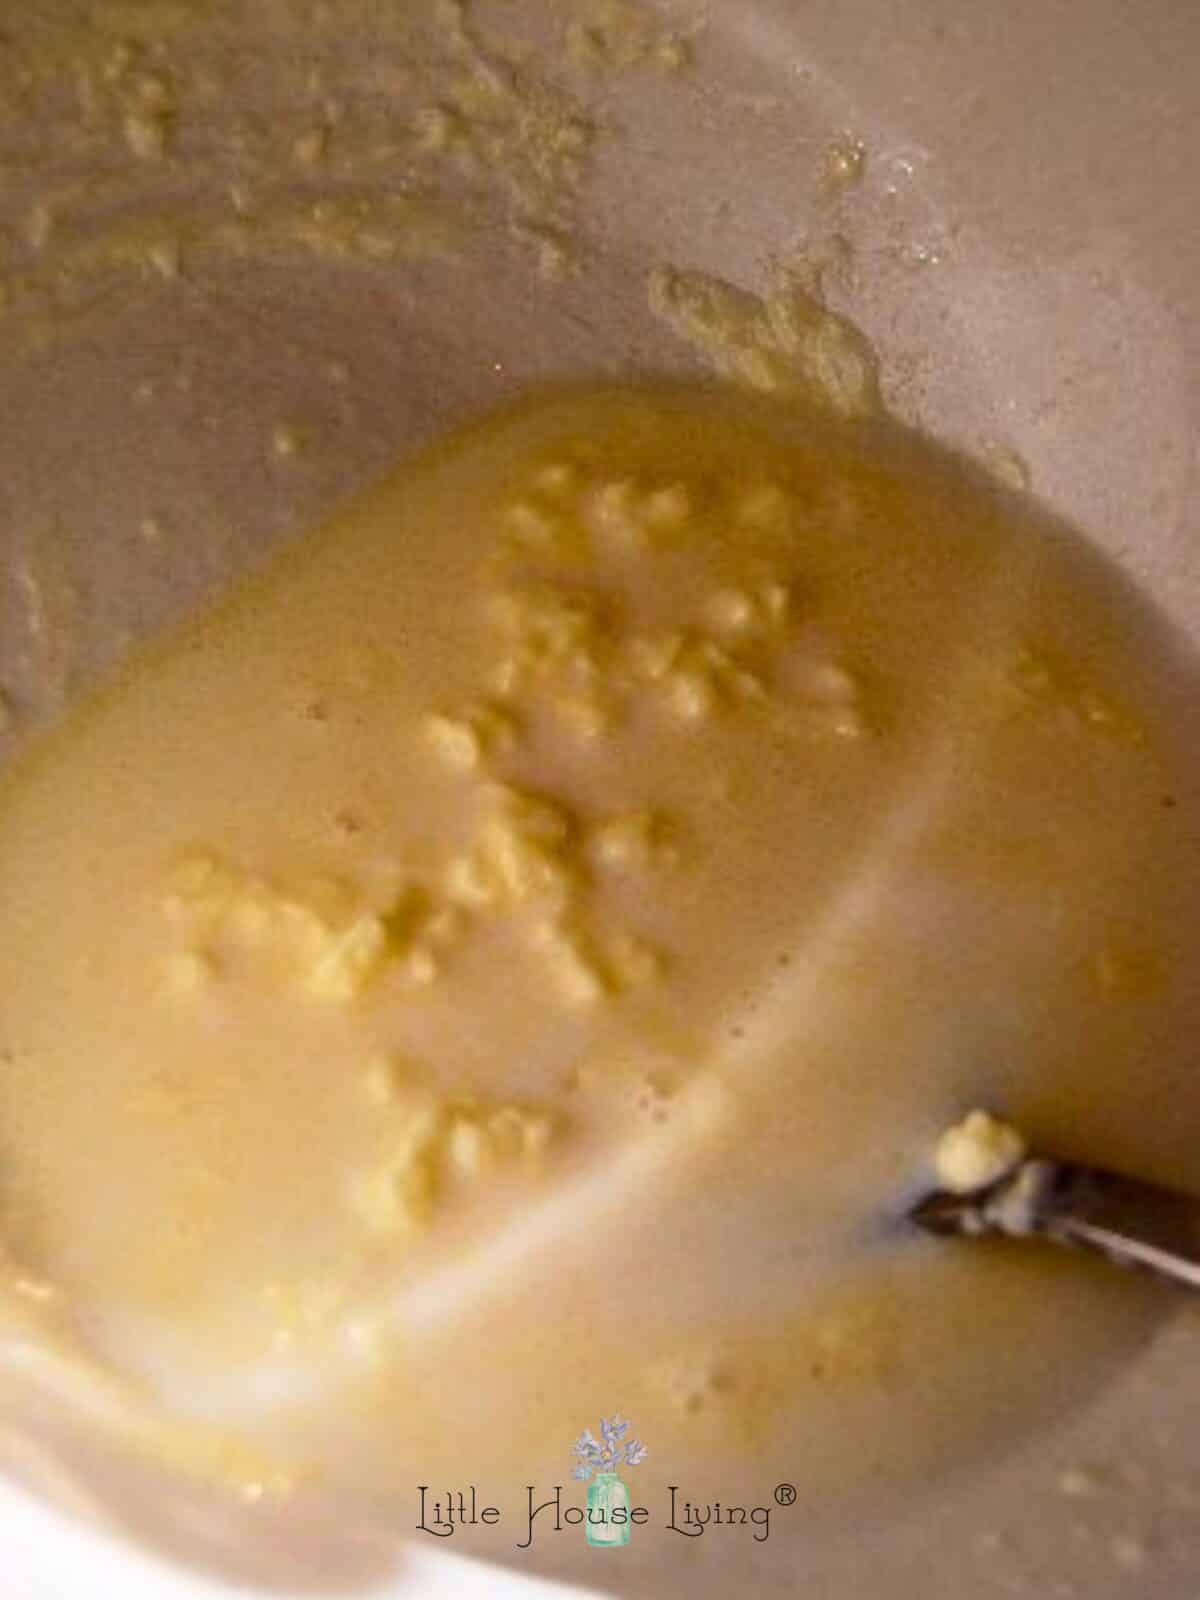 Melted butter and milk in a white bowl.